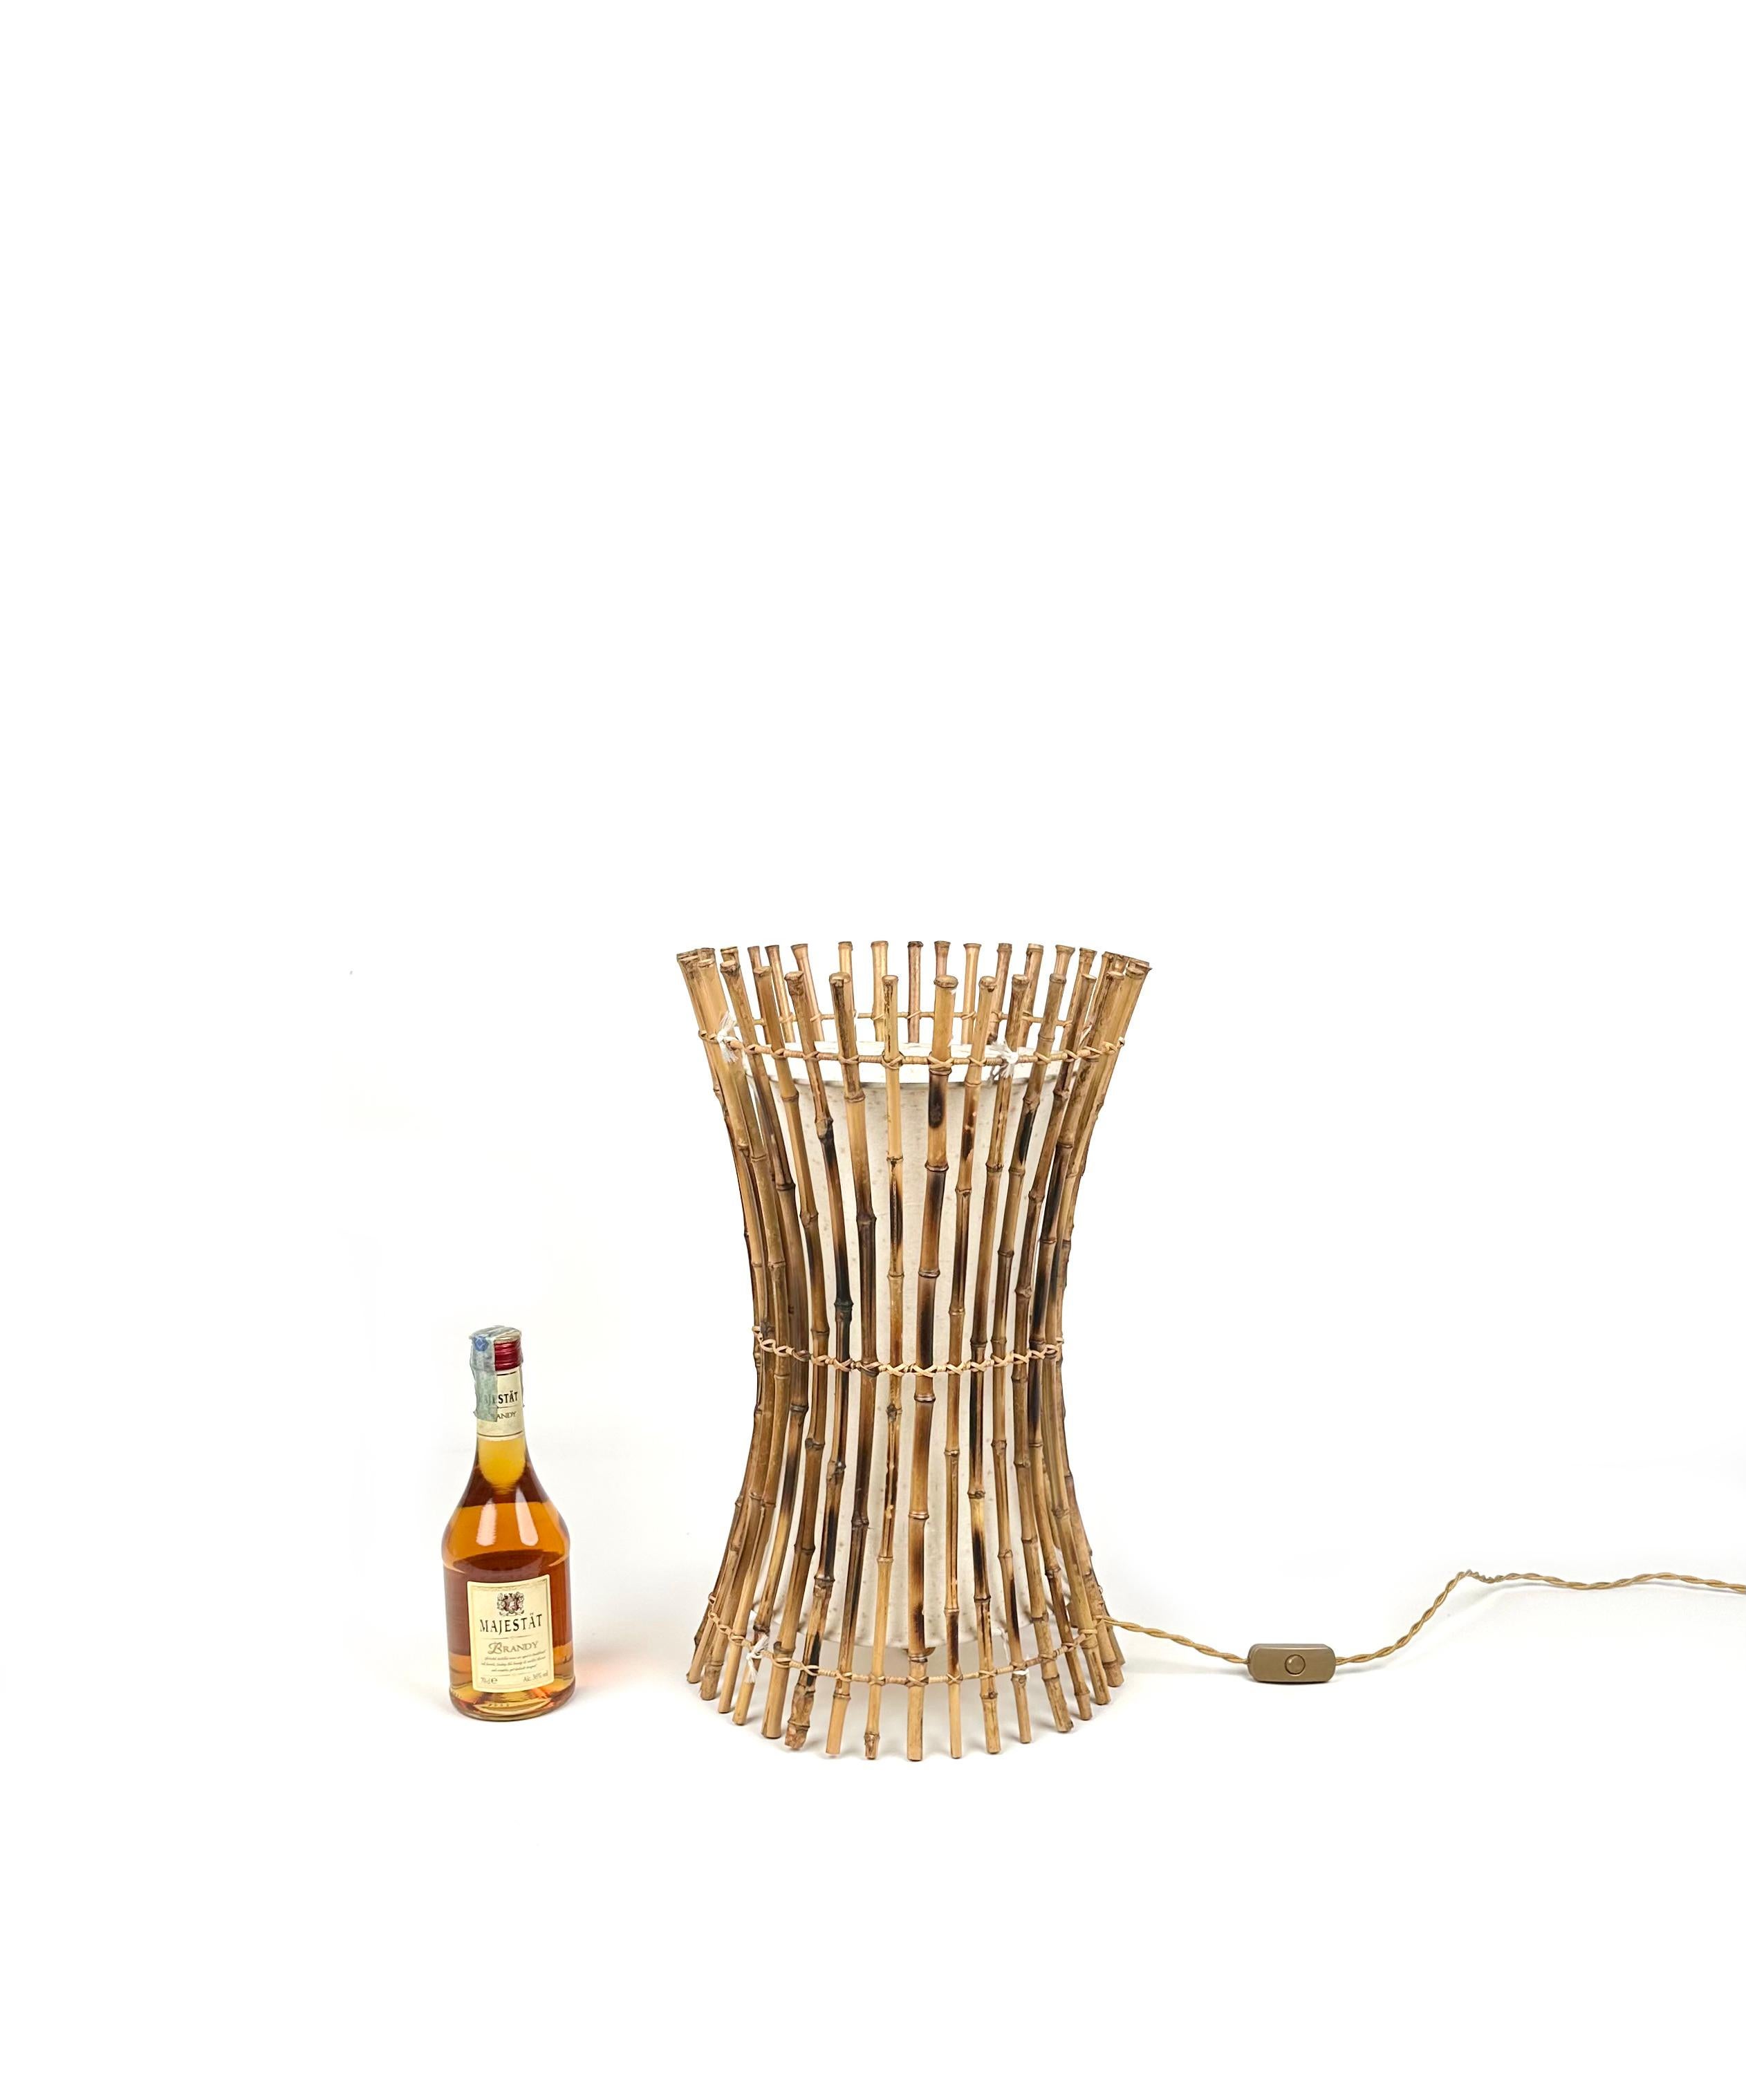 Bamboo, Rattan & Cotton Table or Floor Lamp Franco Albini Style, Italy, 1960s In Good Condition For Sale In Rome, IT